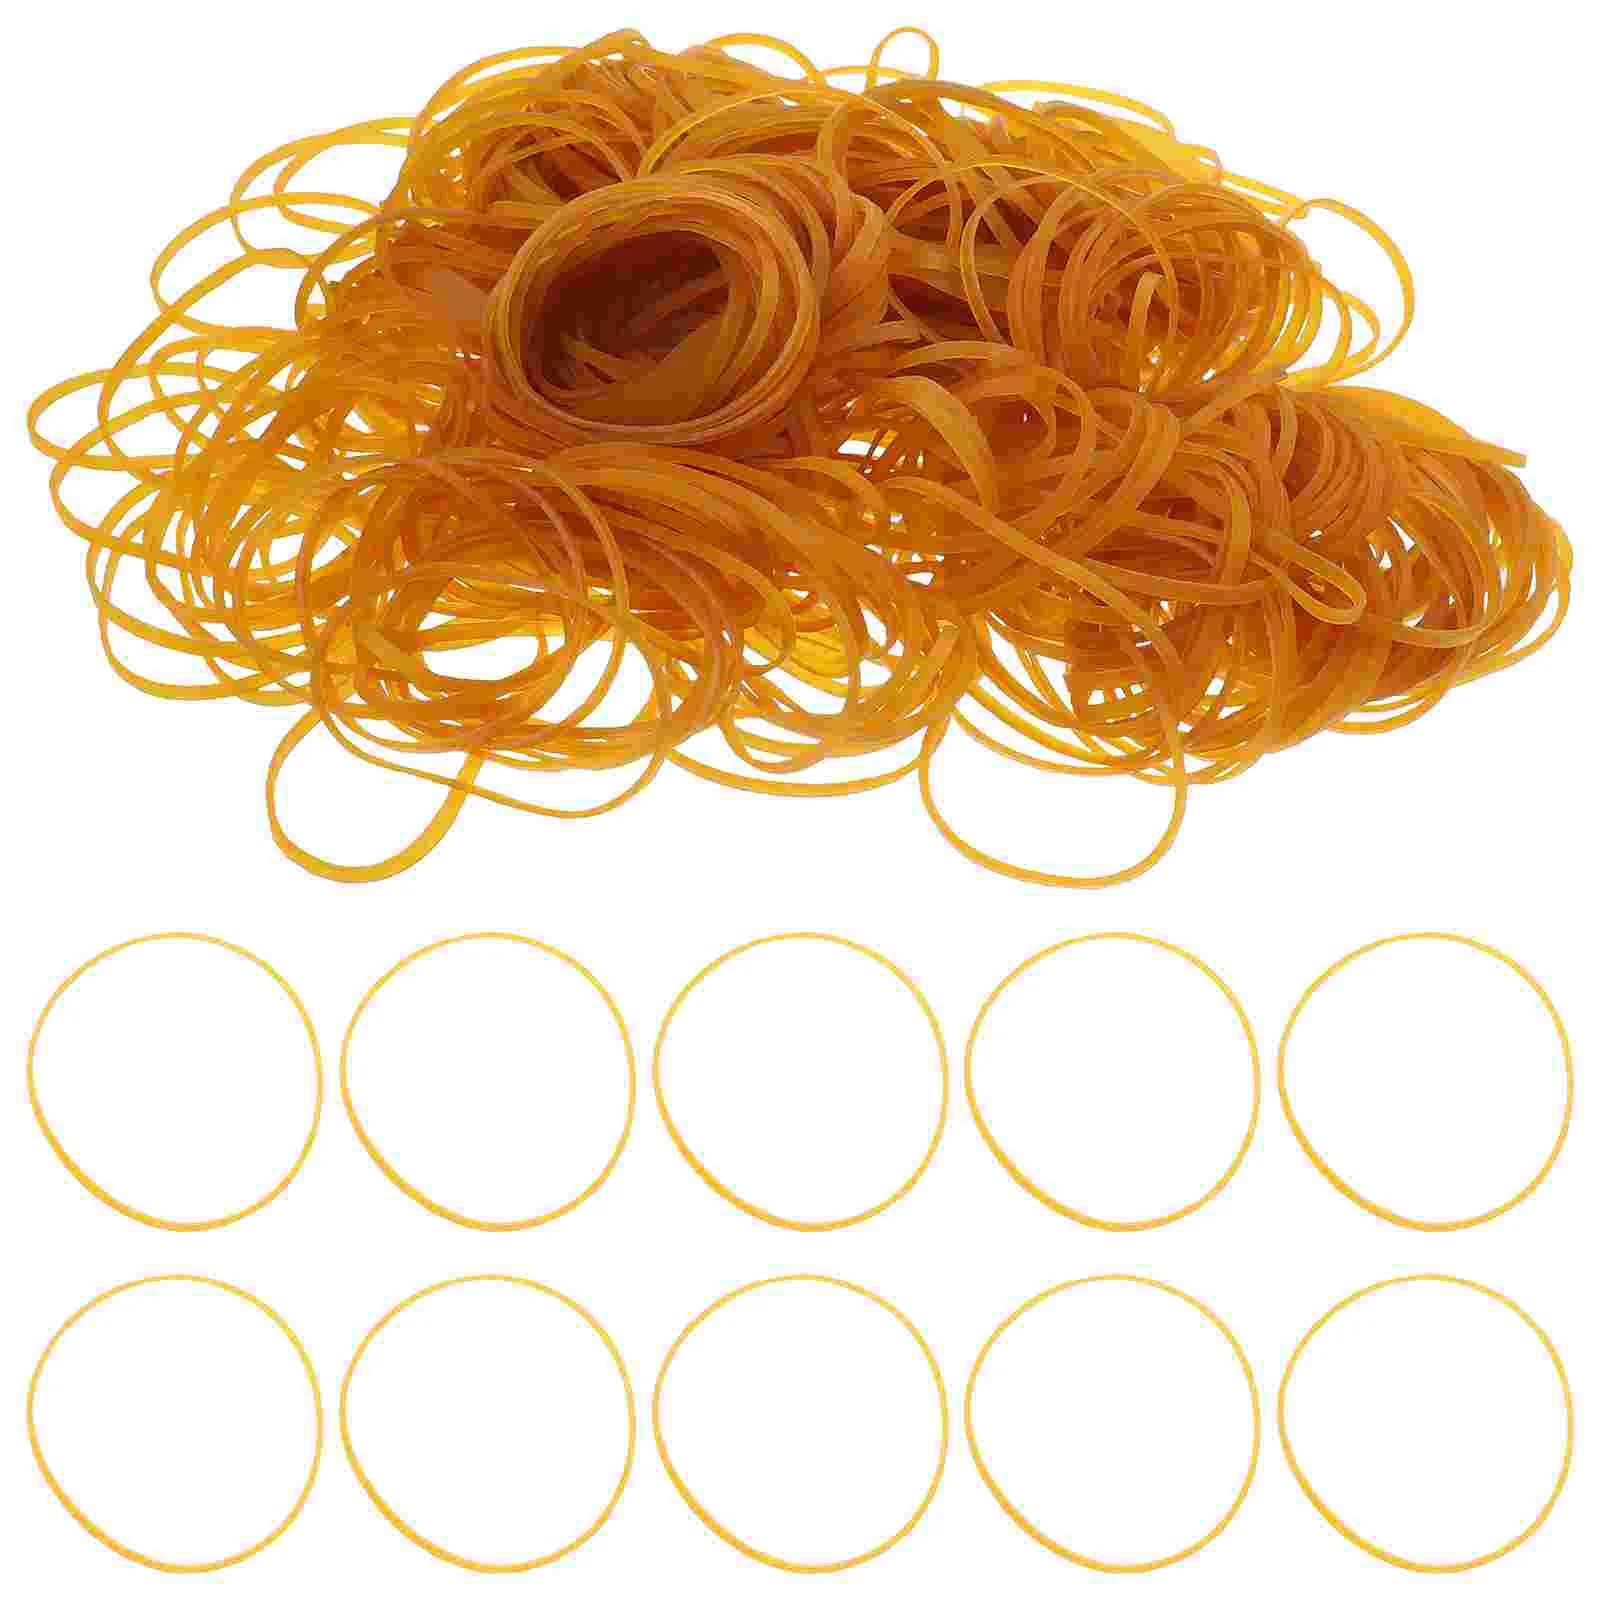 

550 Pcs Rubber Bands Household Kit Garbage Can Elastic Fishing Stretch Multi-functional Outdoor Trash Fixing Belt Binding